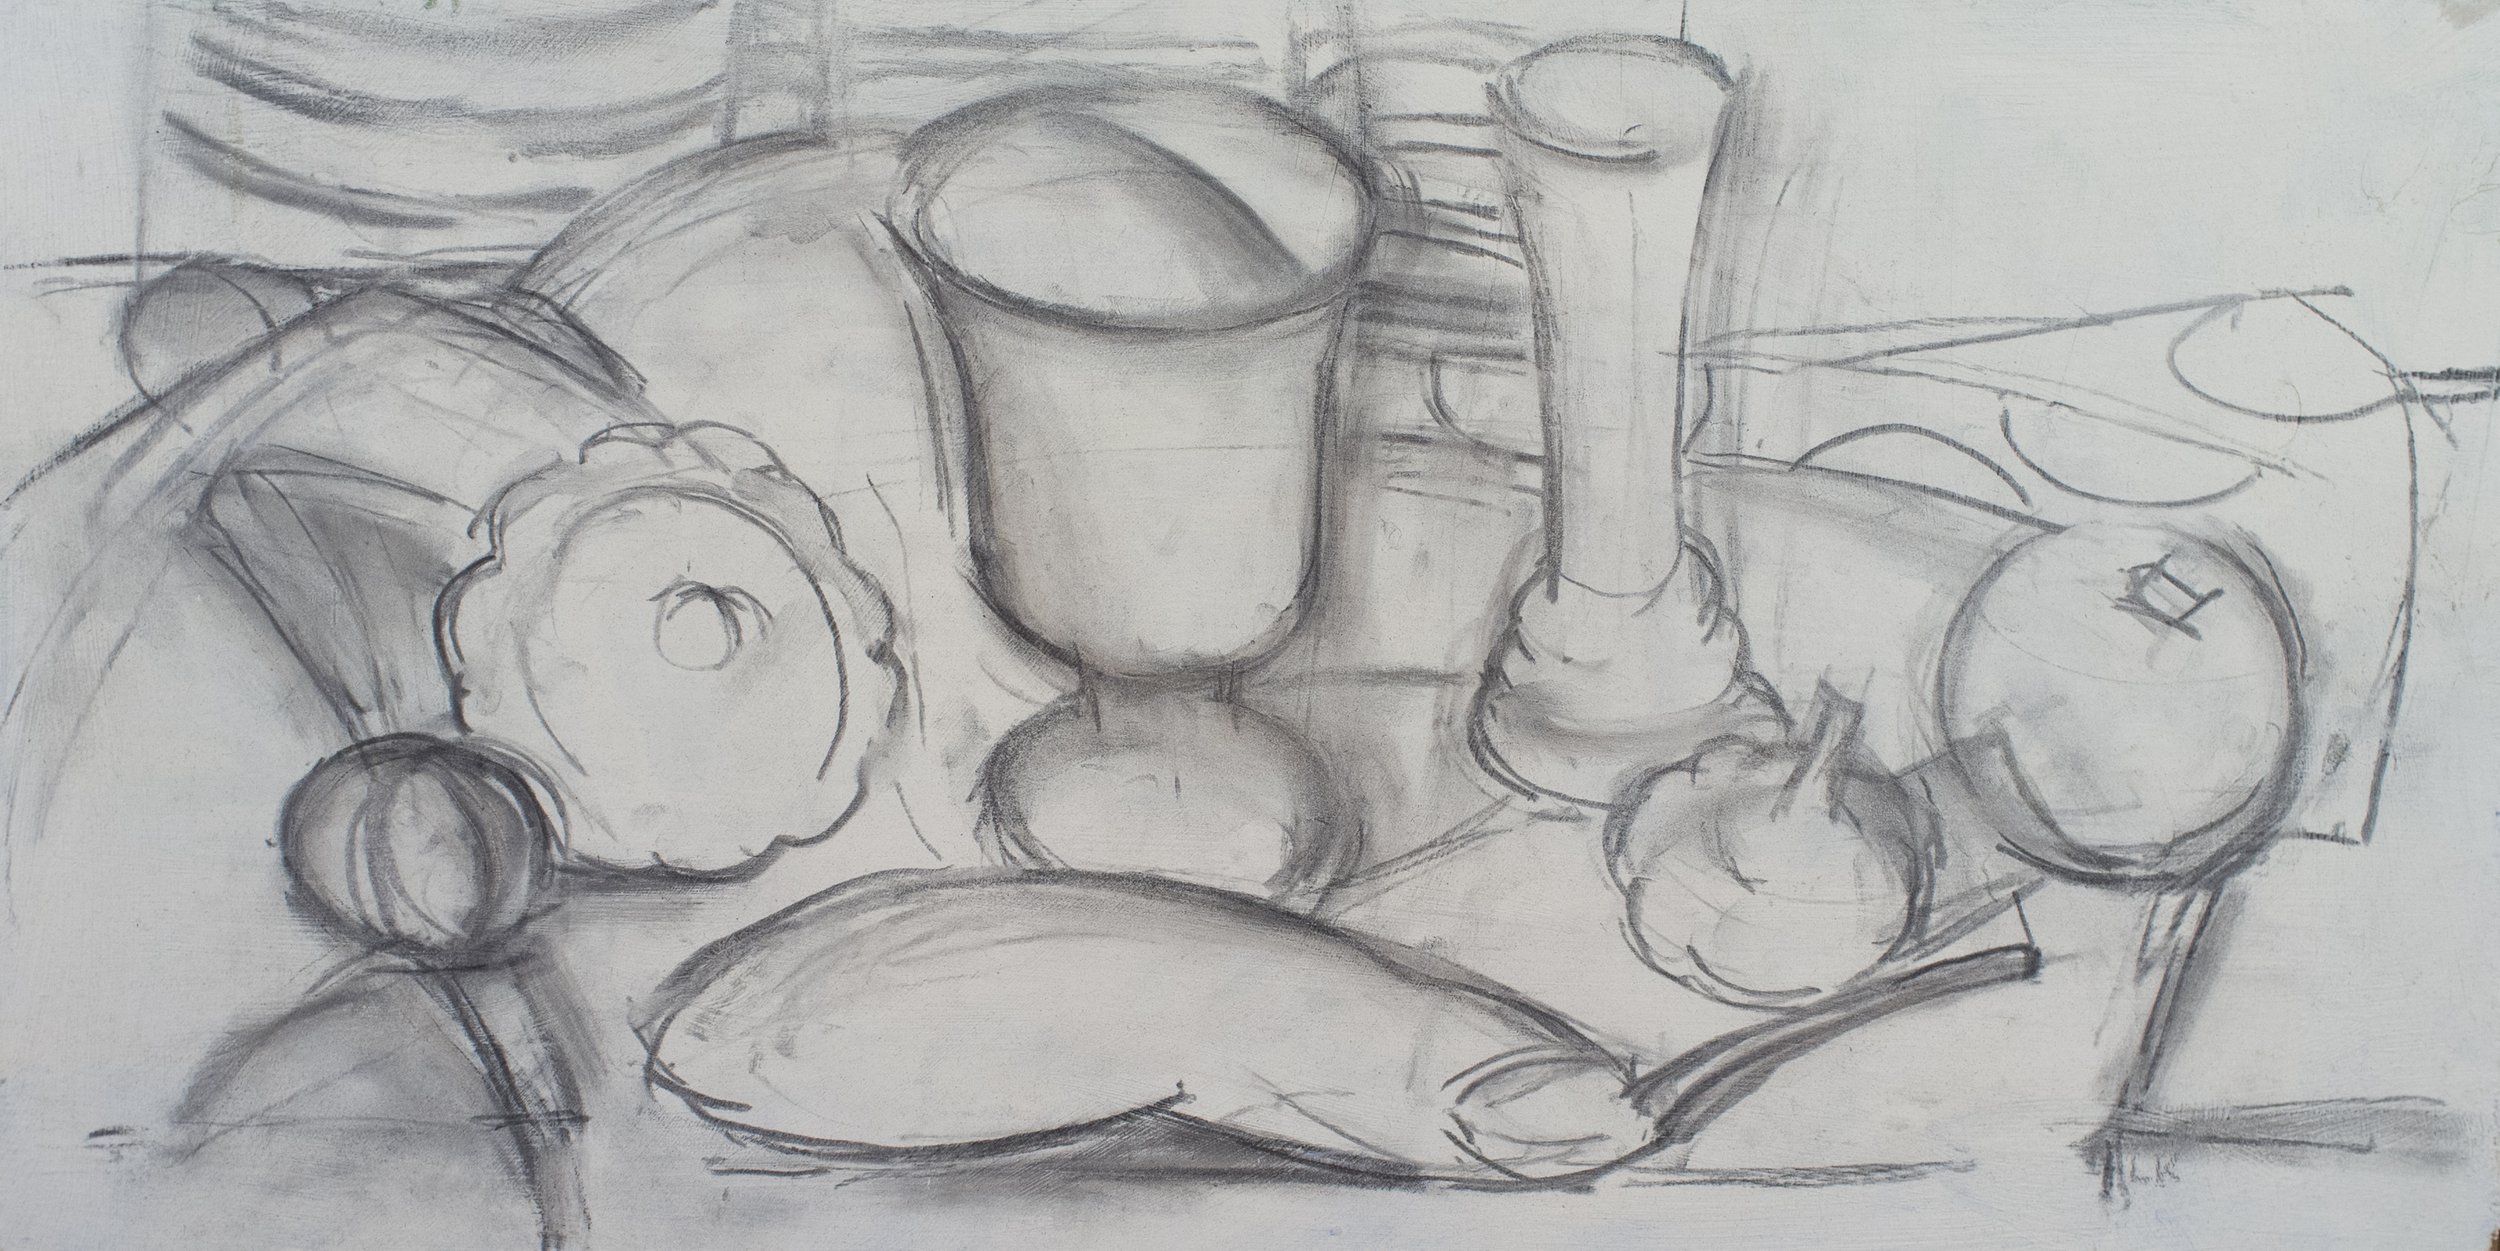   Gray Cloth, Milk Glass, Vases, Pattypan and Tomato , undated, charcoal/panel (framed), 10 x 20 in., $400 